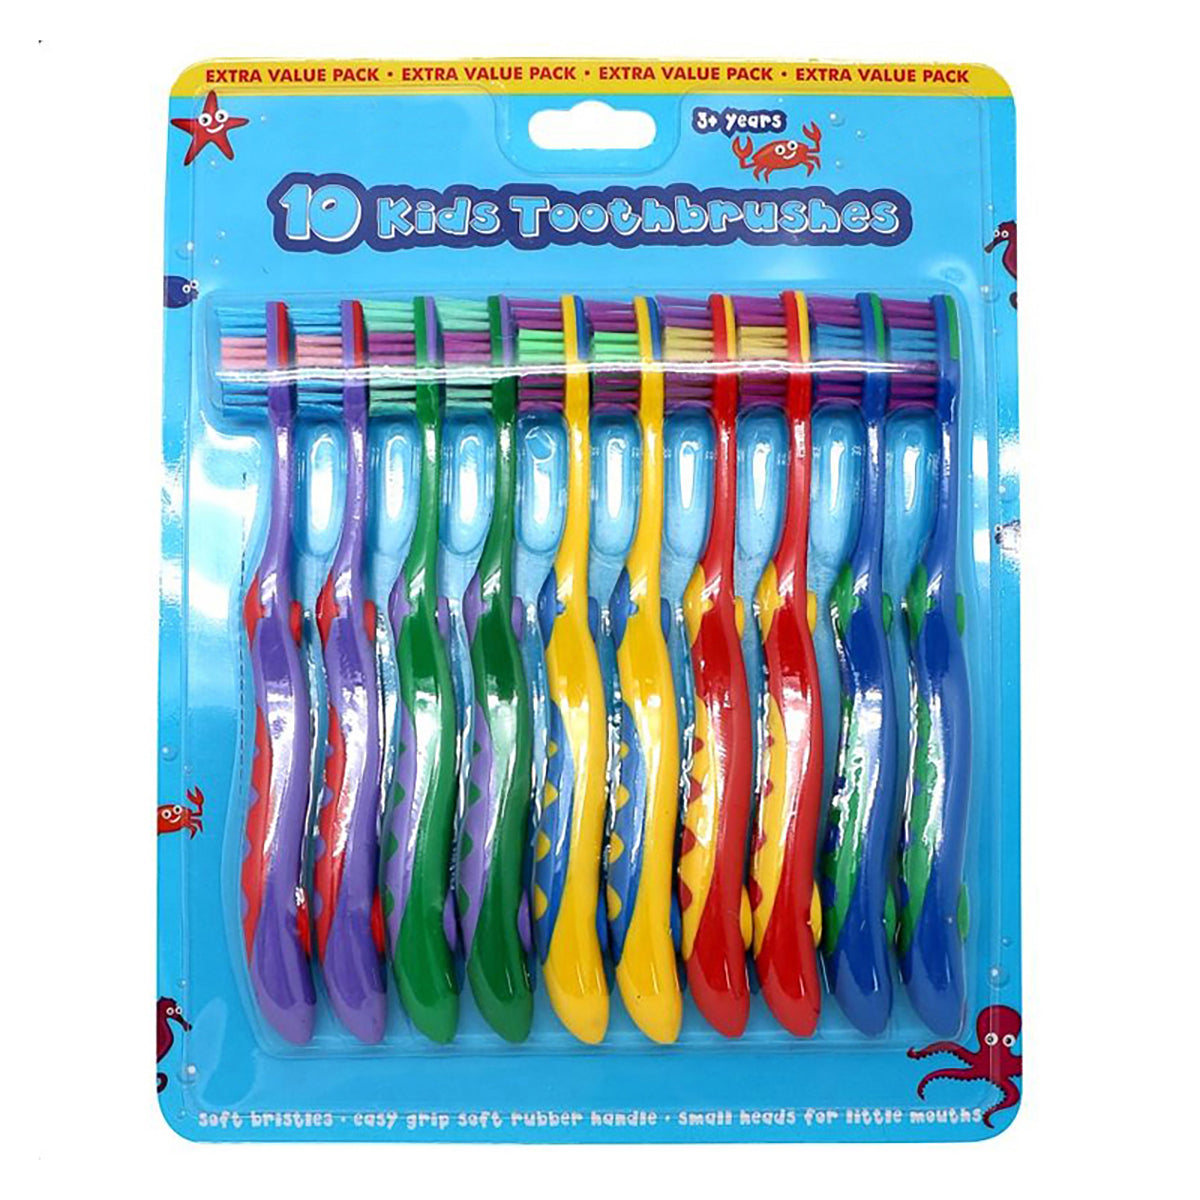 10 PK Kids toothbrushes extra value